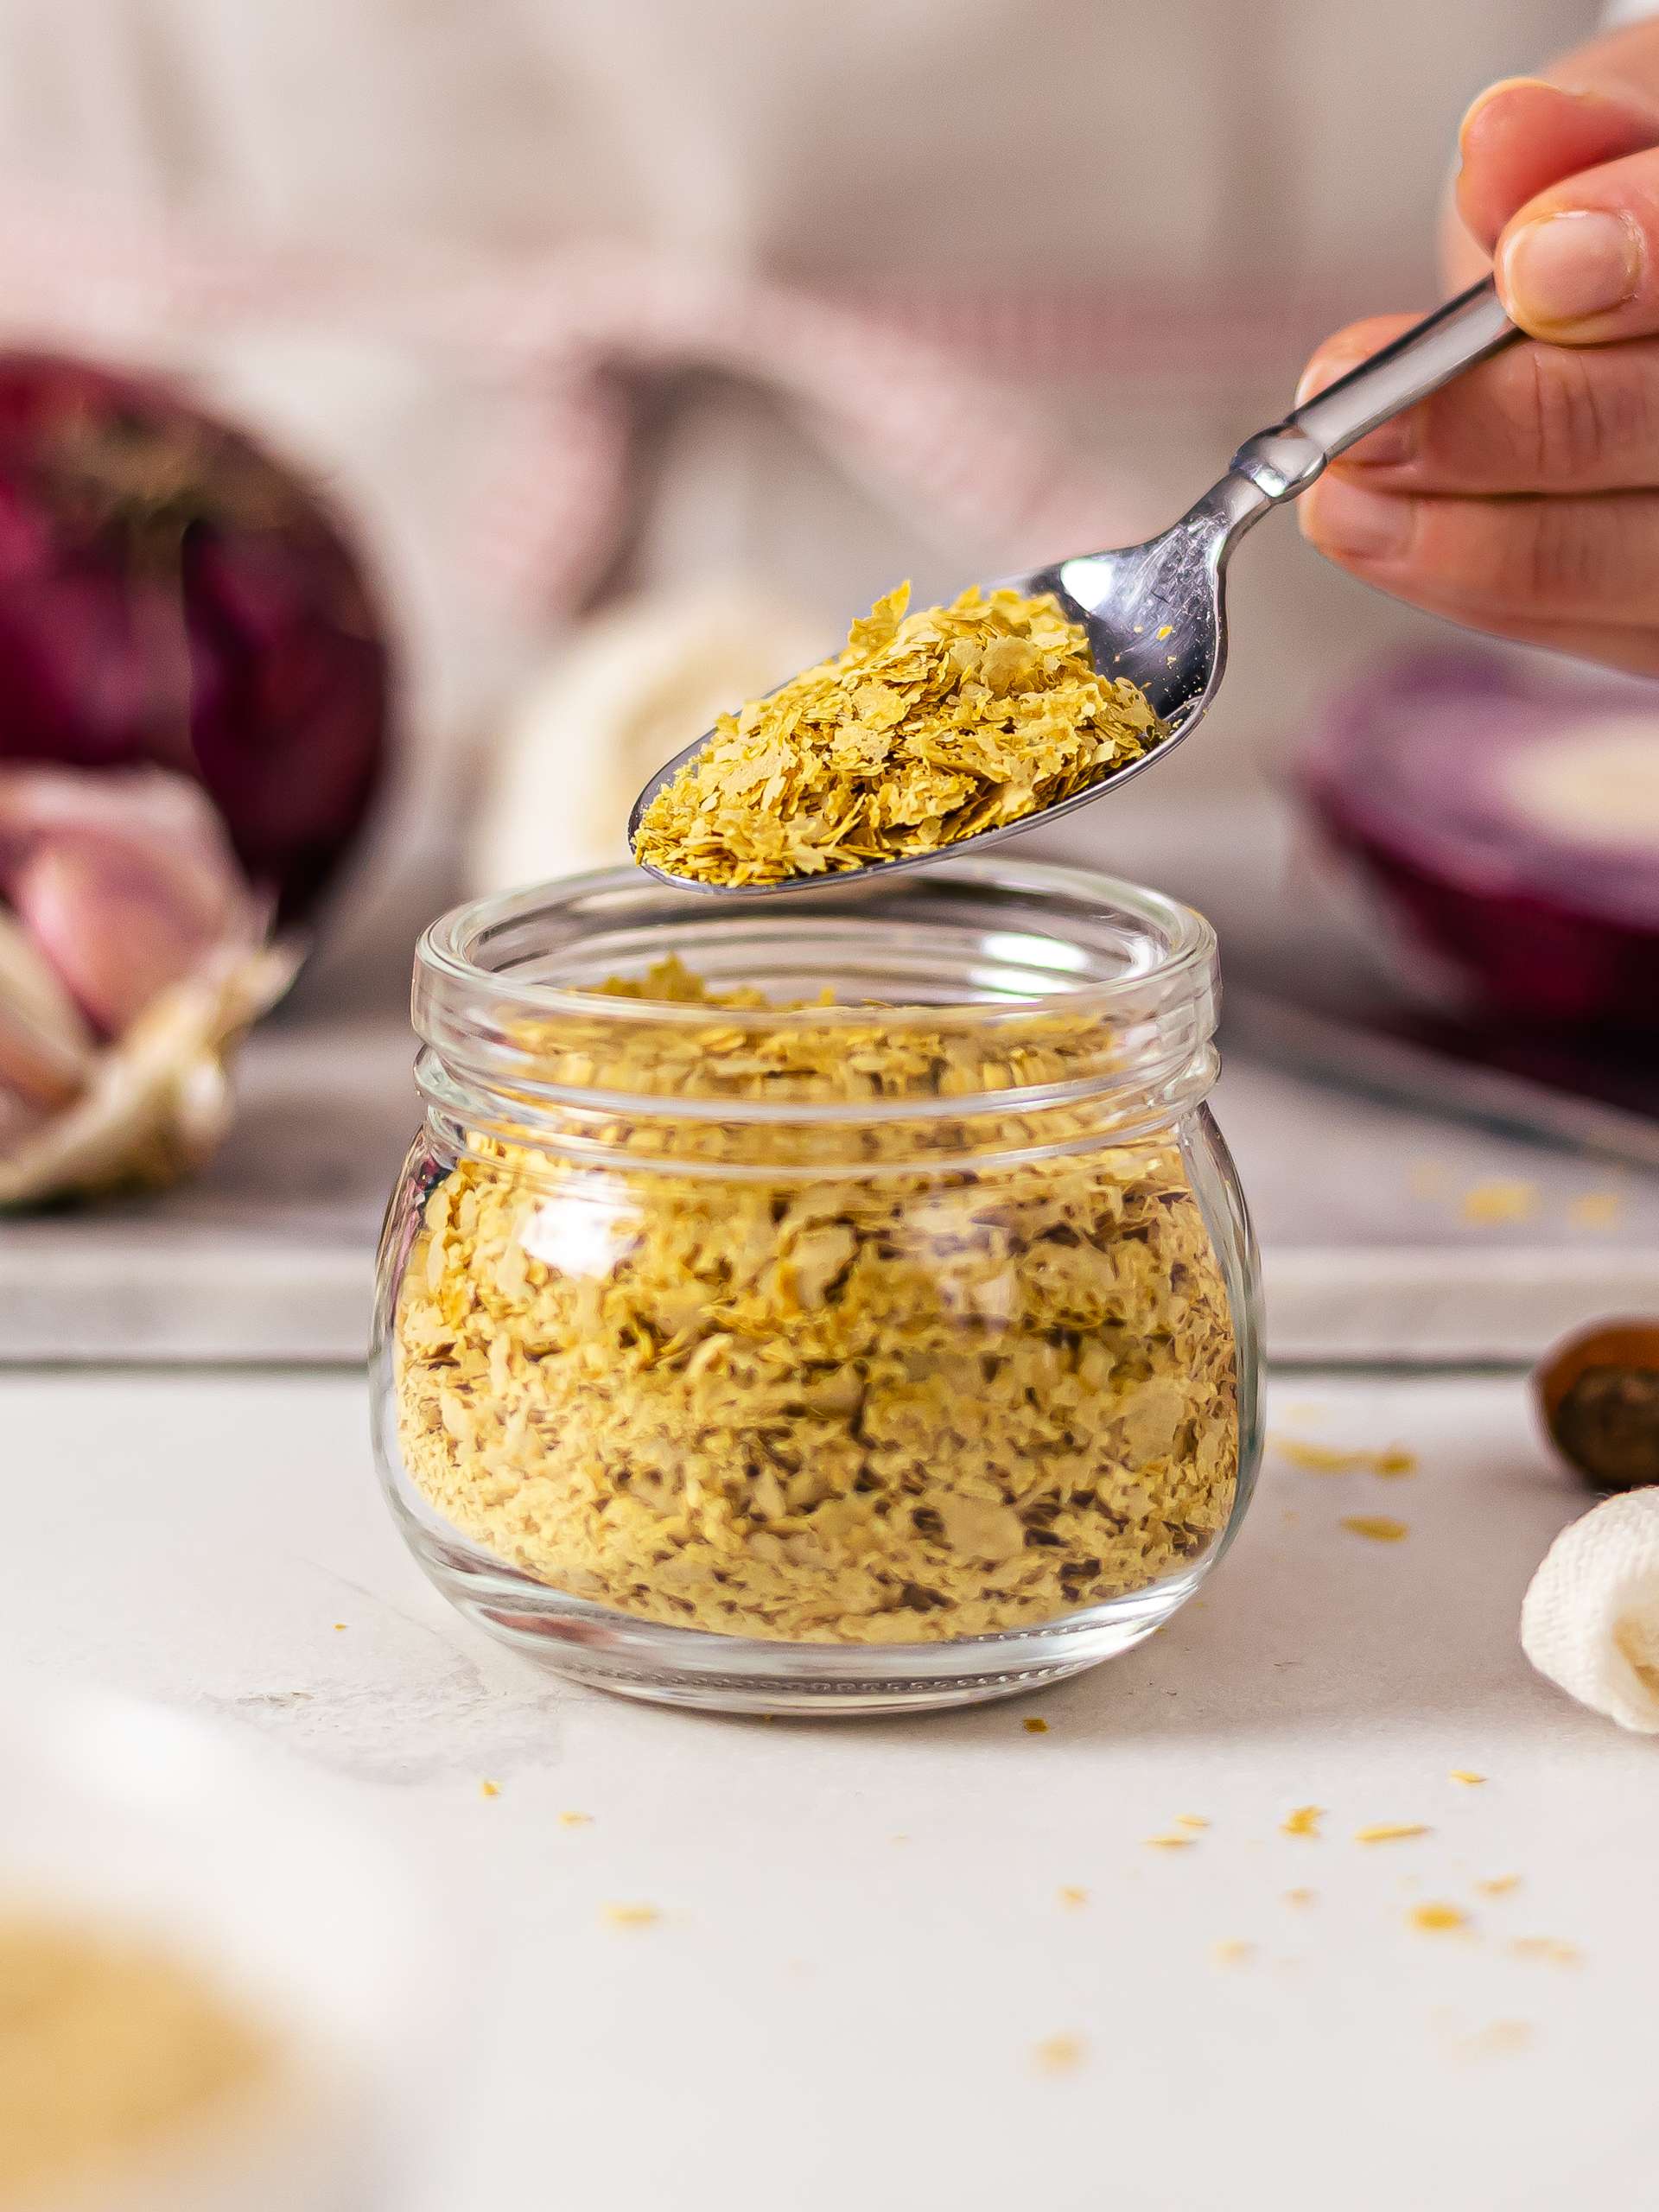 Why Nutritional Yeast Is So Great